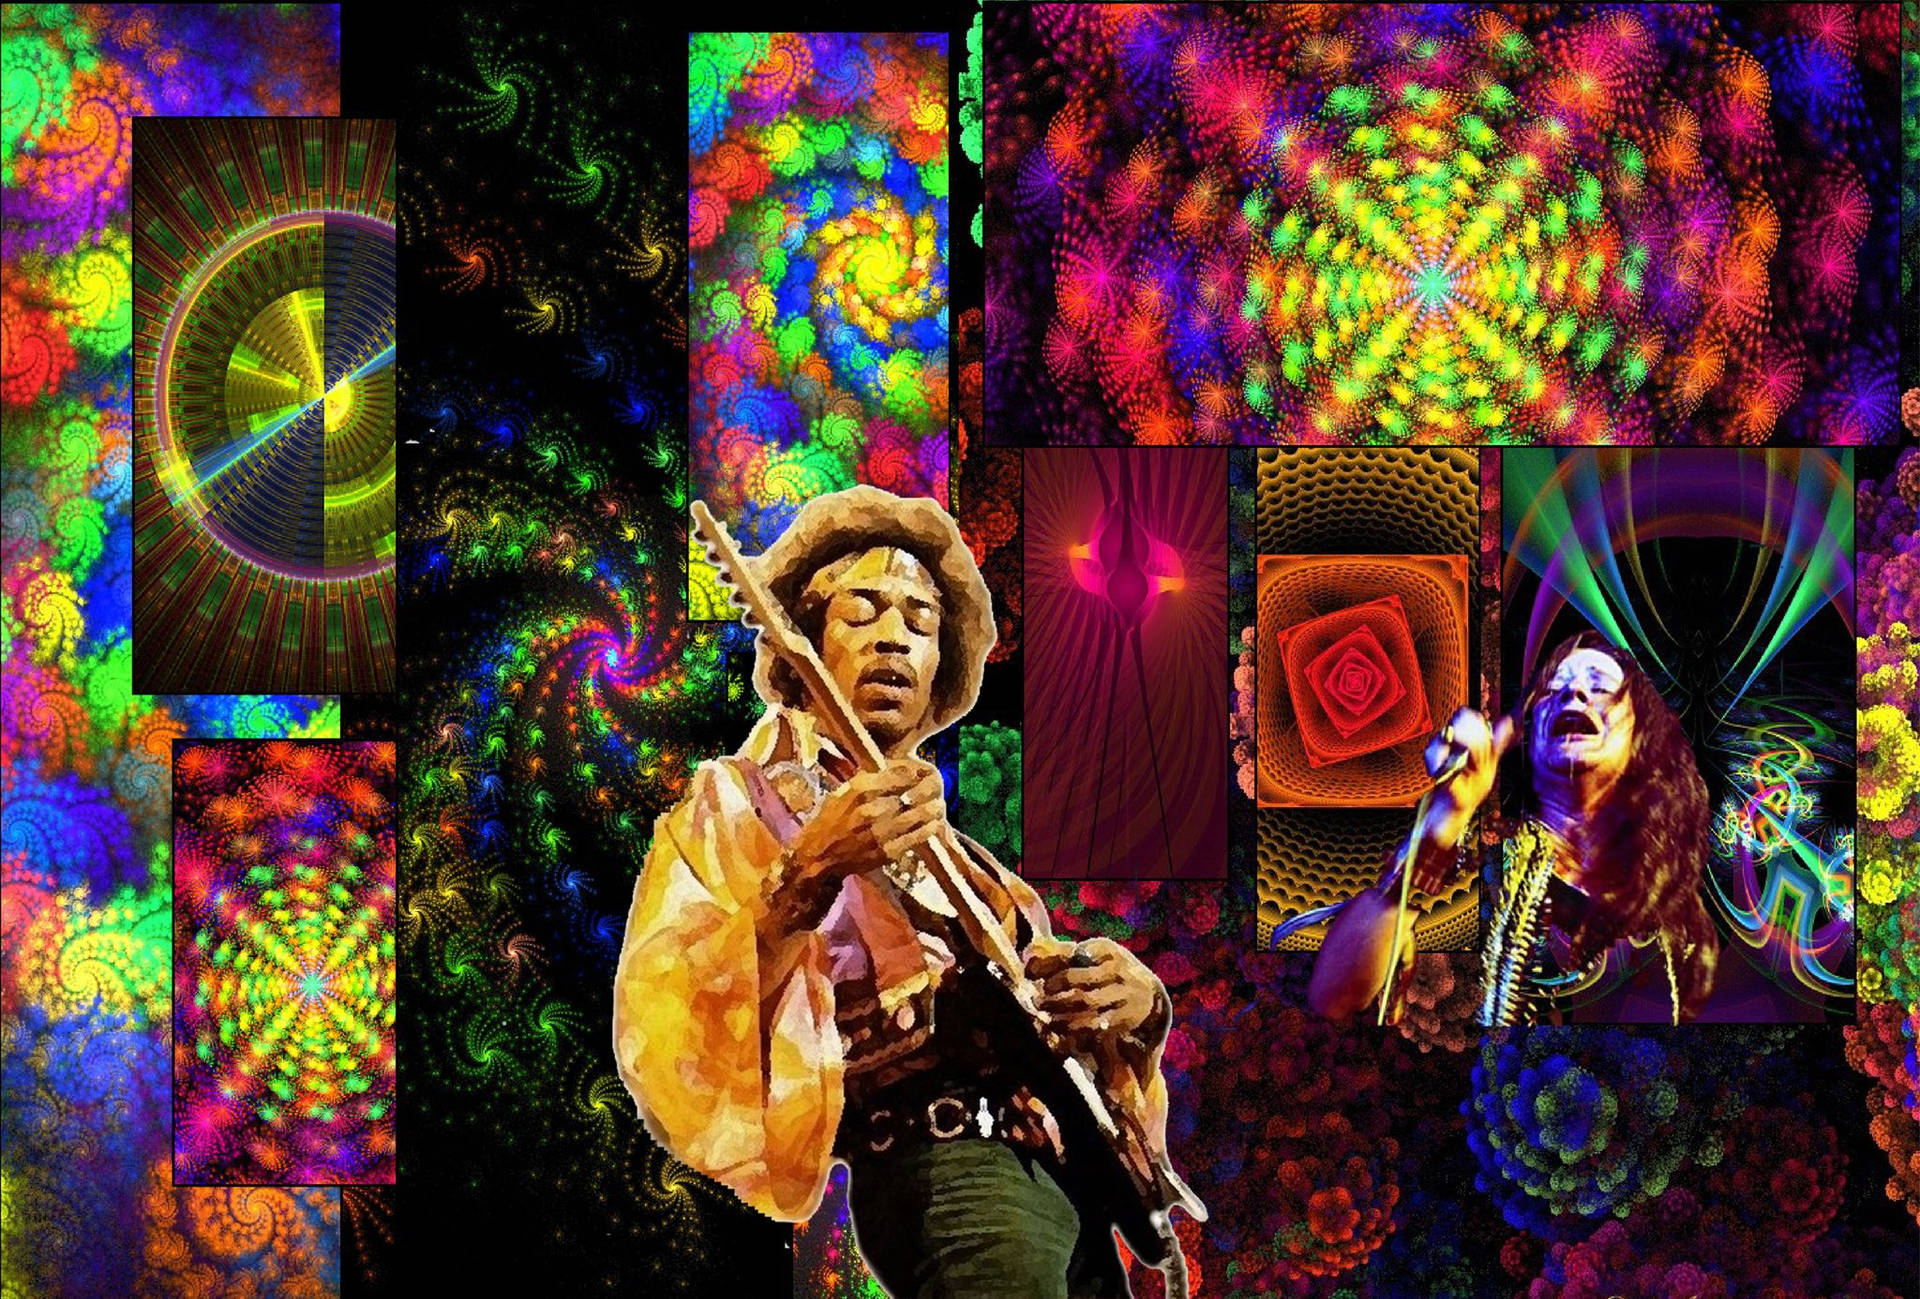 Woodstock Performers Psychedelic Art Background